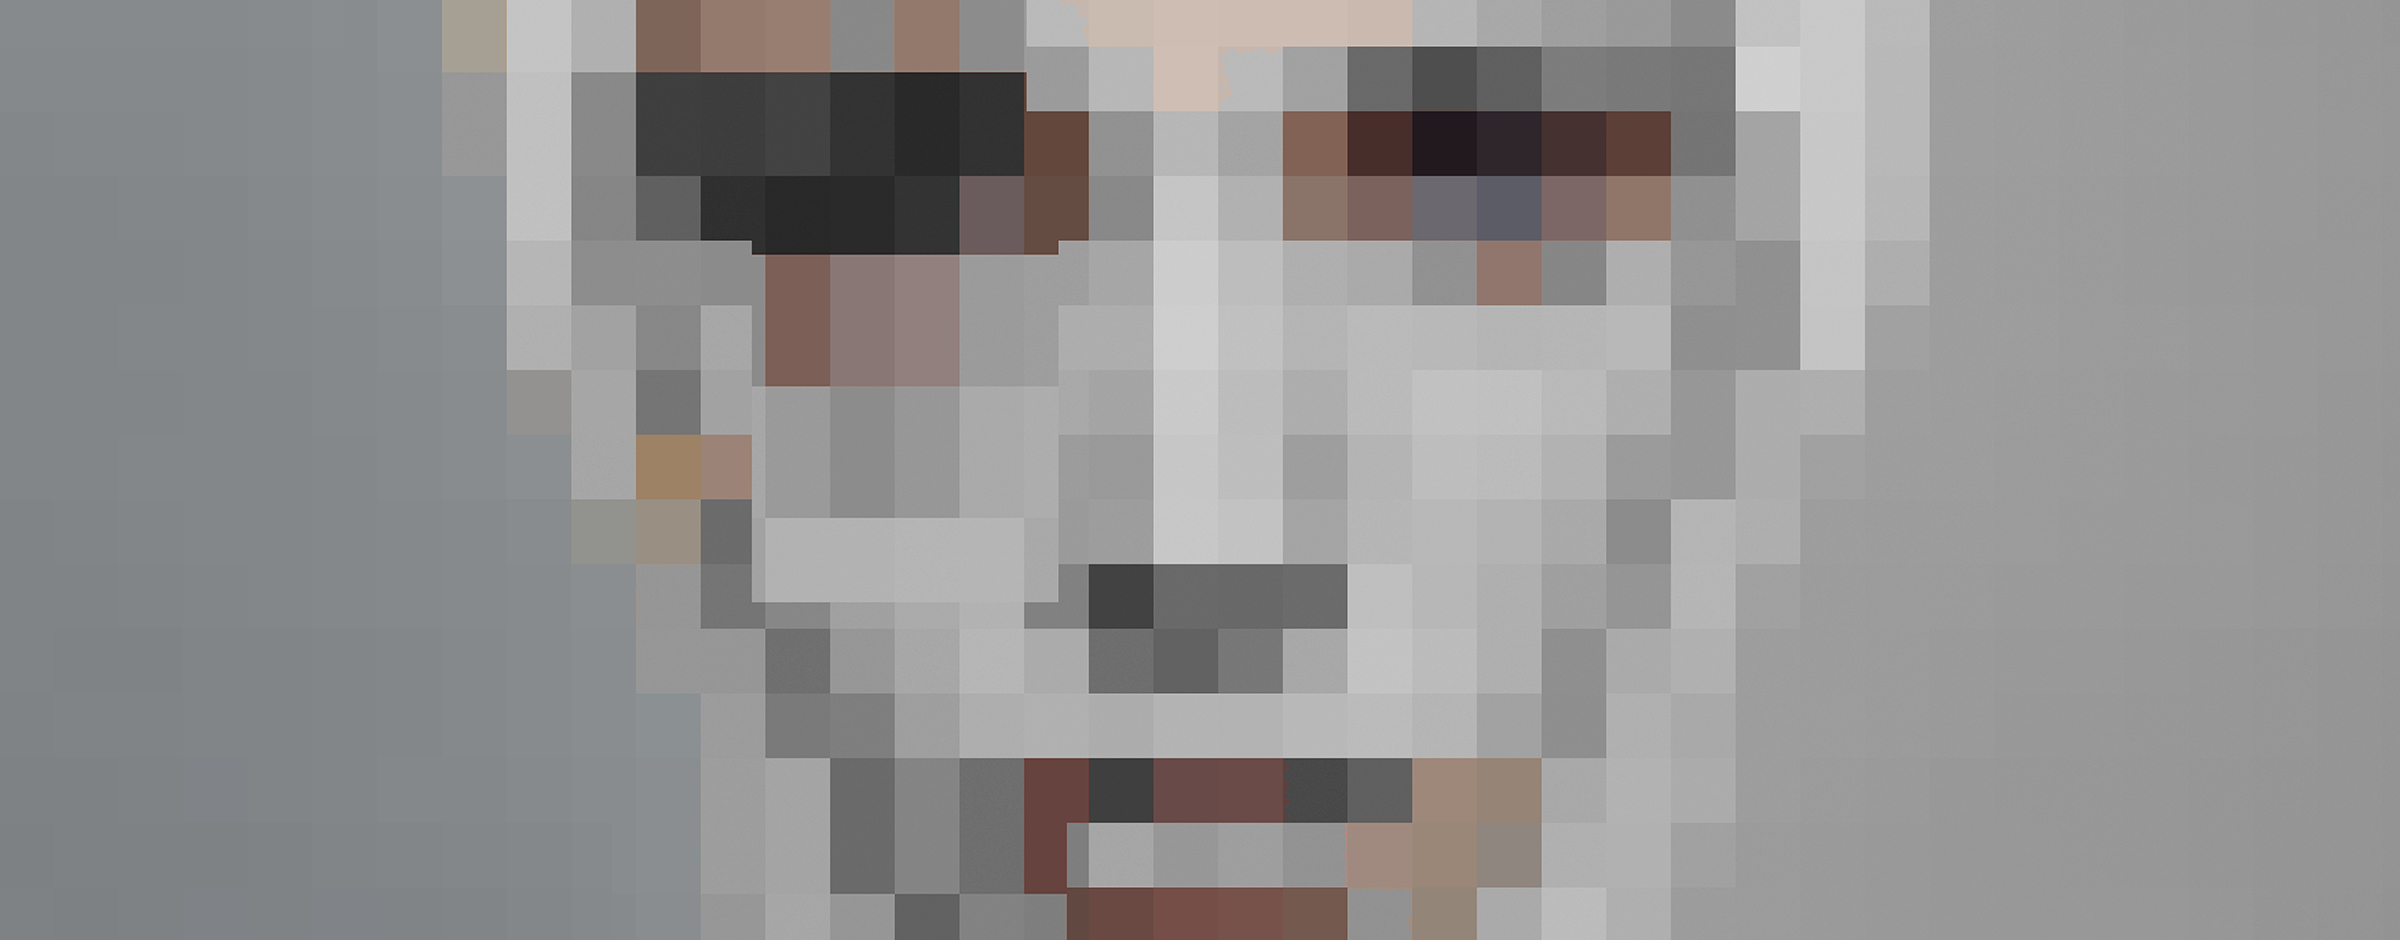 Pixelated face